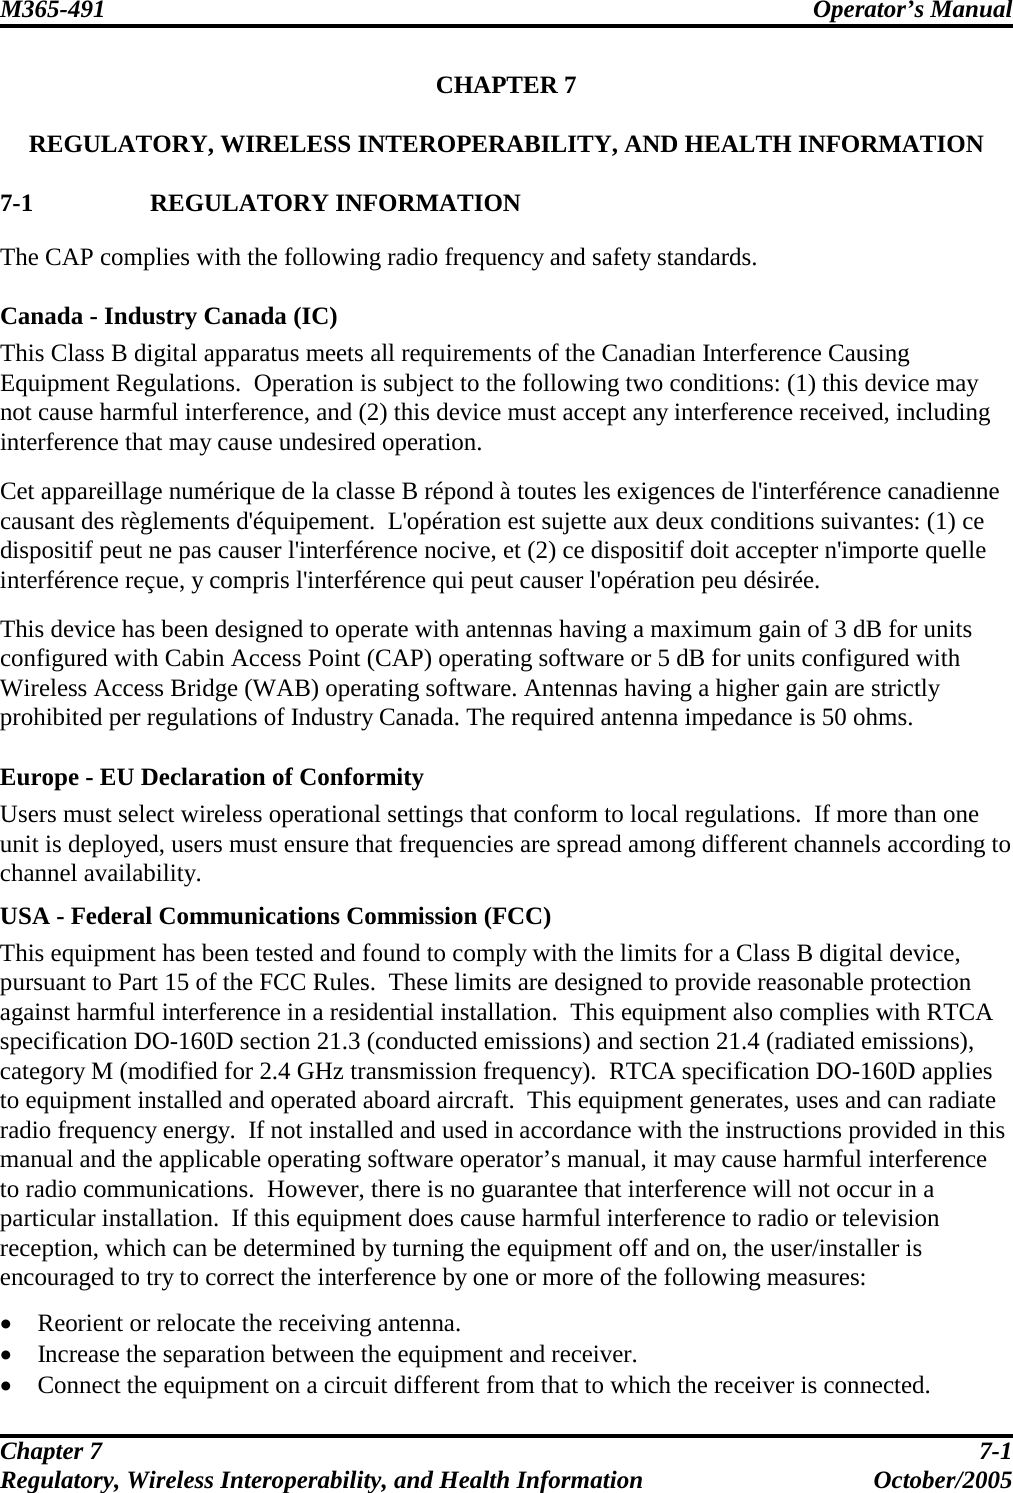 M365-491 Operator’s Manual   Chapter 7  7-1 Regulatory, Wireless Interoperability, and Health Information October/2005 CHAPTER 7  REGULATORY, WIRELESS INTEROPERABILITY, AND HEALTH INFORMATION  7-1 REGULATORY INFORMATION The CAP complies with the following radio frequency and safety standards.  Canada - Industry Canada (IC) This Class B digital apparatus meets all requirements of the Canadian Interference Causing Equipment Regulations.  Operation is subject to the following two conditions: (1) this device may not cause harmful interference, and (2) this device must accept any interference received, including interference that may cause undesired operation.  Cet appareillage numérique de la classe B répond à toutes les exigences de l&apos;interférence canadienne causant des règlements d&apos;équipement.  L&apos;opération est sujette aux deux conditions suivantes: (1) ce dispositif peut ne pas causer l&apos;interférence nocive, et (2) ce dispositif doit accepter n&apos;importe quelle interférence reçue, y compris l&apos;interférence qui peut causer l&apos;opération peu désirée.   This device has been designed to operate with antennas having a maximum gain of 3 dB for units configured with Cabin Access Point (CAP) operating software or 5 dB for units configured with Wireless Access Bridge (WAB) operating software. Antennas having a higher gain are strictly prohibited per regulations of Industry Canada. The required antenna impedance is 50 ohms.  Europe - EU Declaration of Conformity Users must select wireless operational settings that conform to local regulations.  If more than one unit is deployed, users must ensure that frequencies are spread among different channels according to channel availability. USA - Federal Communications Commission (FCC) This equipment has been tested and found to comply with the limits for a Class B digital device, pursuant to Part 15 of the FCC Rules.  These limits are designed to provide reasonable protection against harmful interference in a residential installation.  This equipment also complies with RTCA specification DO-160D section 21.3 (conducted emissions) and section 21.4 (radiated emissions), category M (modified for 2.4 GHz transmission frequency).  RTCA specification DO-160D applies to equipment installed and operated aboard aircraft.  This equipment generates, uses and can radiate radio frequency energy.  If not installed and used in accordance with the instructions provided in this manual and the applicable operating software operator’s manual, it may cause harmful interference to radio communications.  However, there is no guarantee that interference will not occur in a particular installation.  If this equipment does cause harmful interference to radio or television reception, which can be determined by turning the equipment off and on, the user/installer is encouraged to try to correct the interference by one or more of the following measures:  • Reorient or relocate the receiving antenna. • Increase the separation between the equipment and receiver. • Connect the equipment on a circuit different from that to which the receiver is connected. 